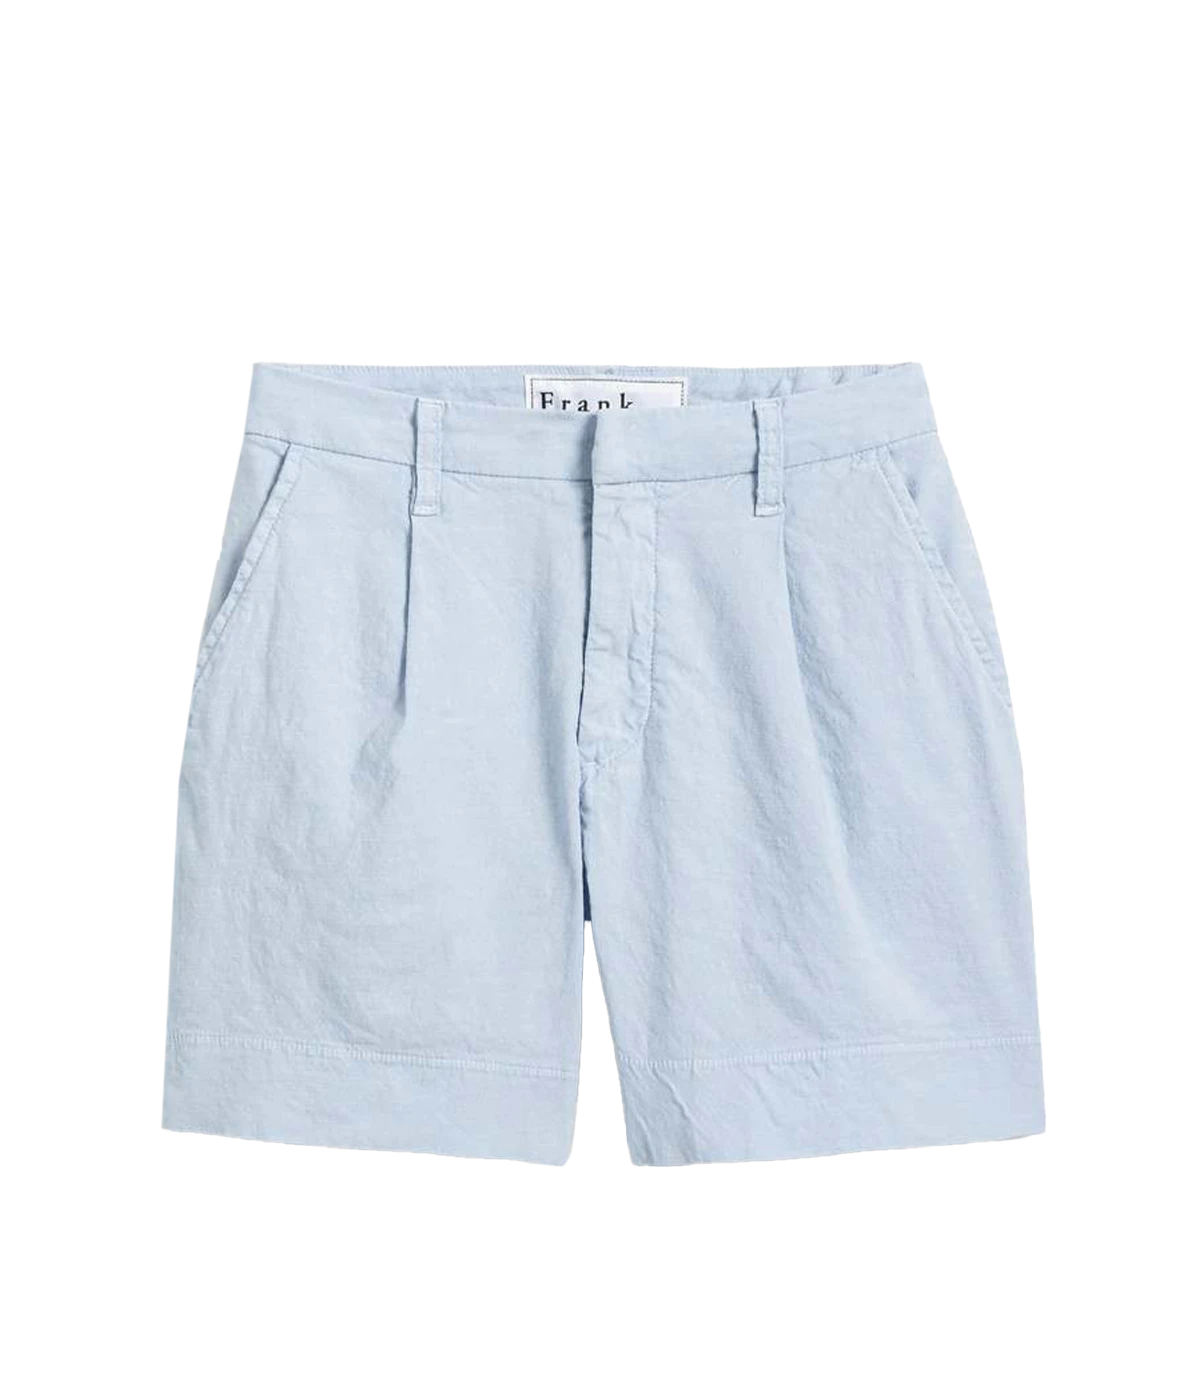 Waterford Tailored Shorts in Powder Blue